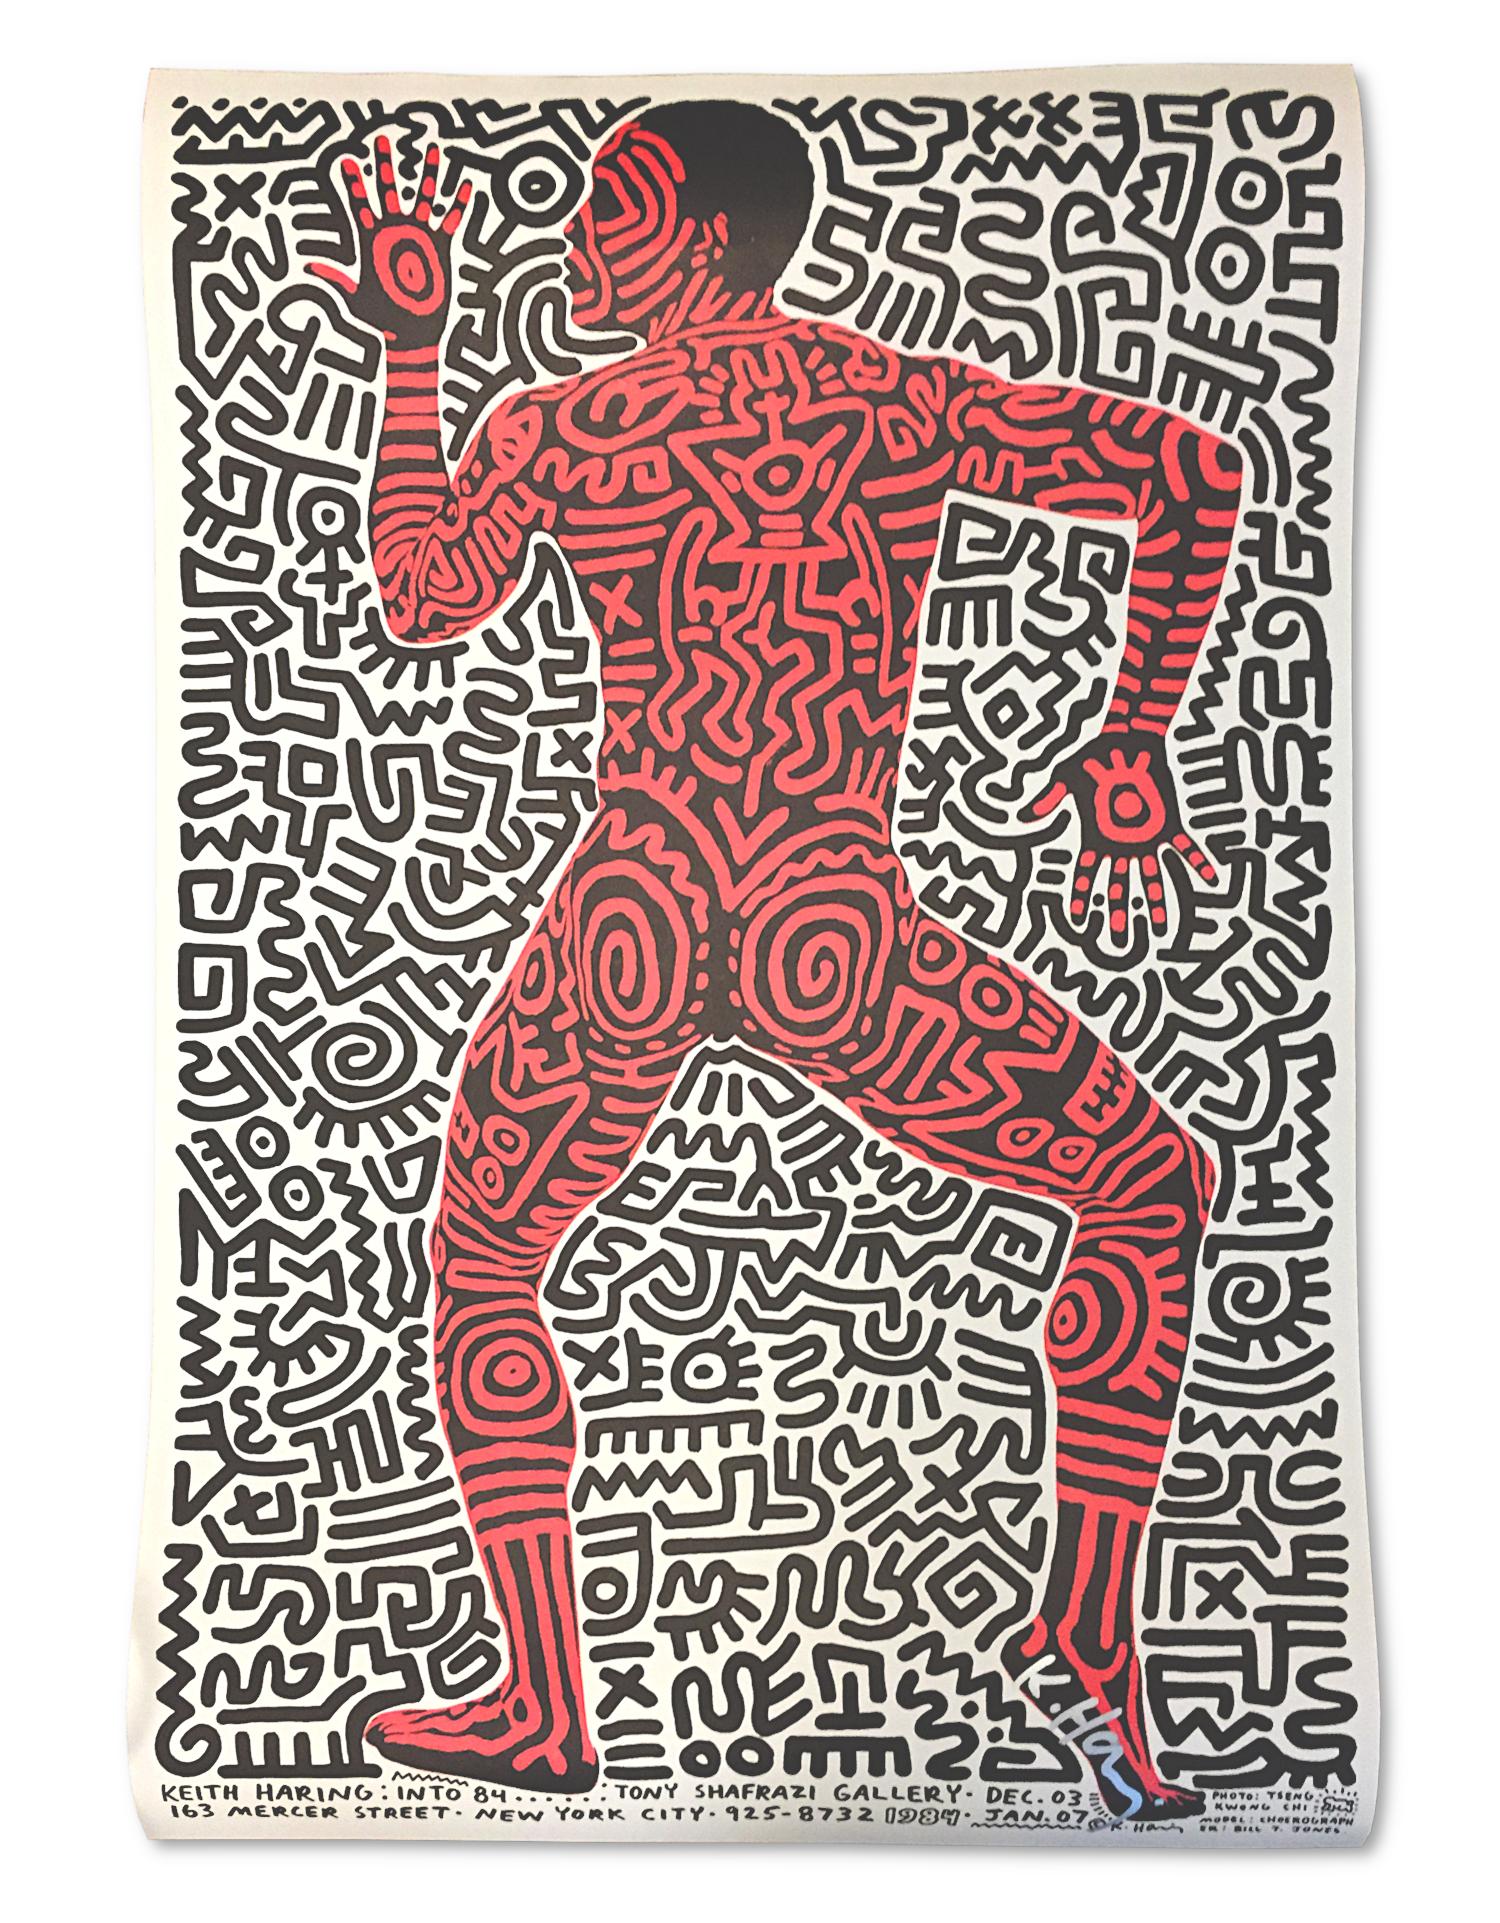 Late 20th Century Keith Haring Signed Original 1983 Exhibition Poster